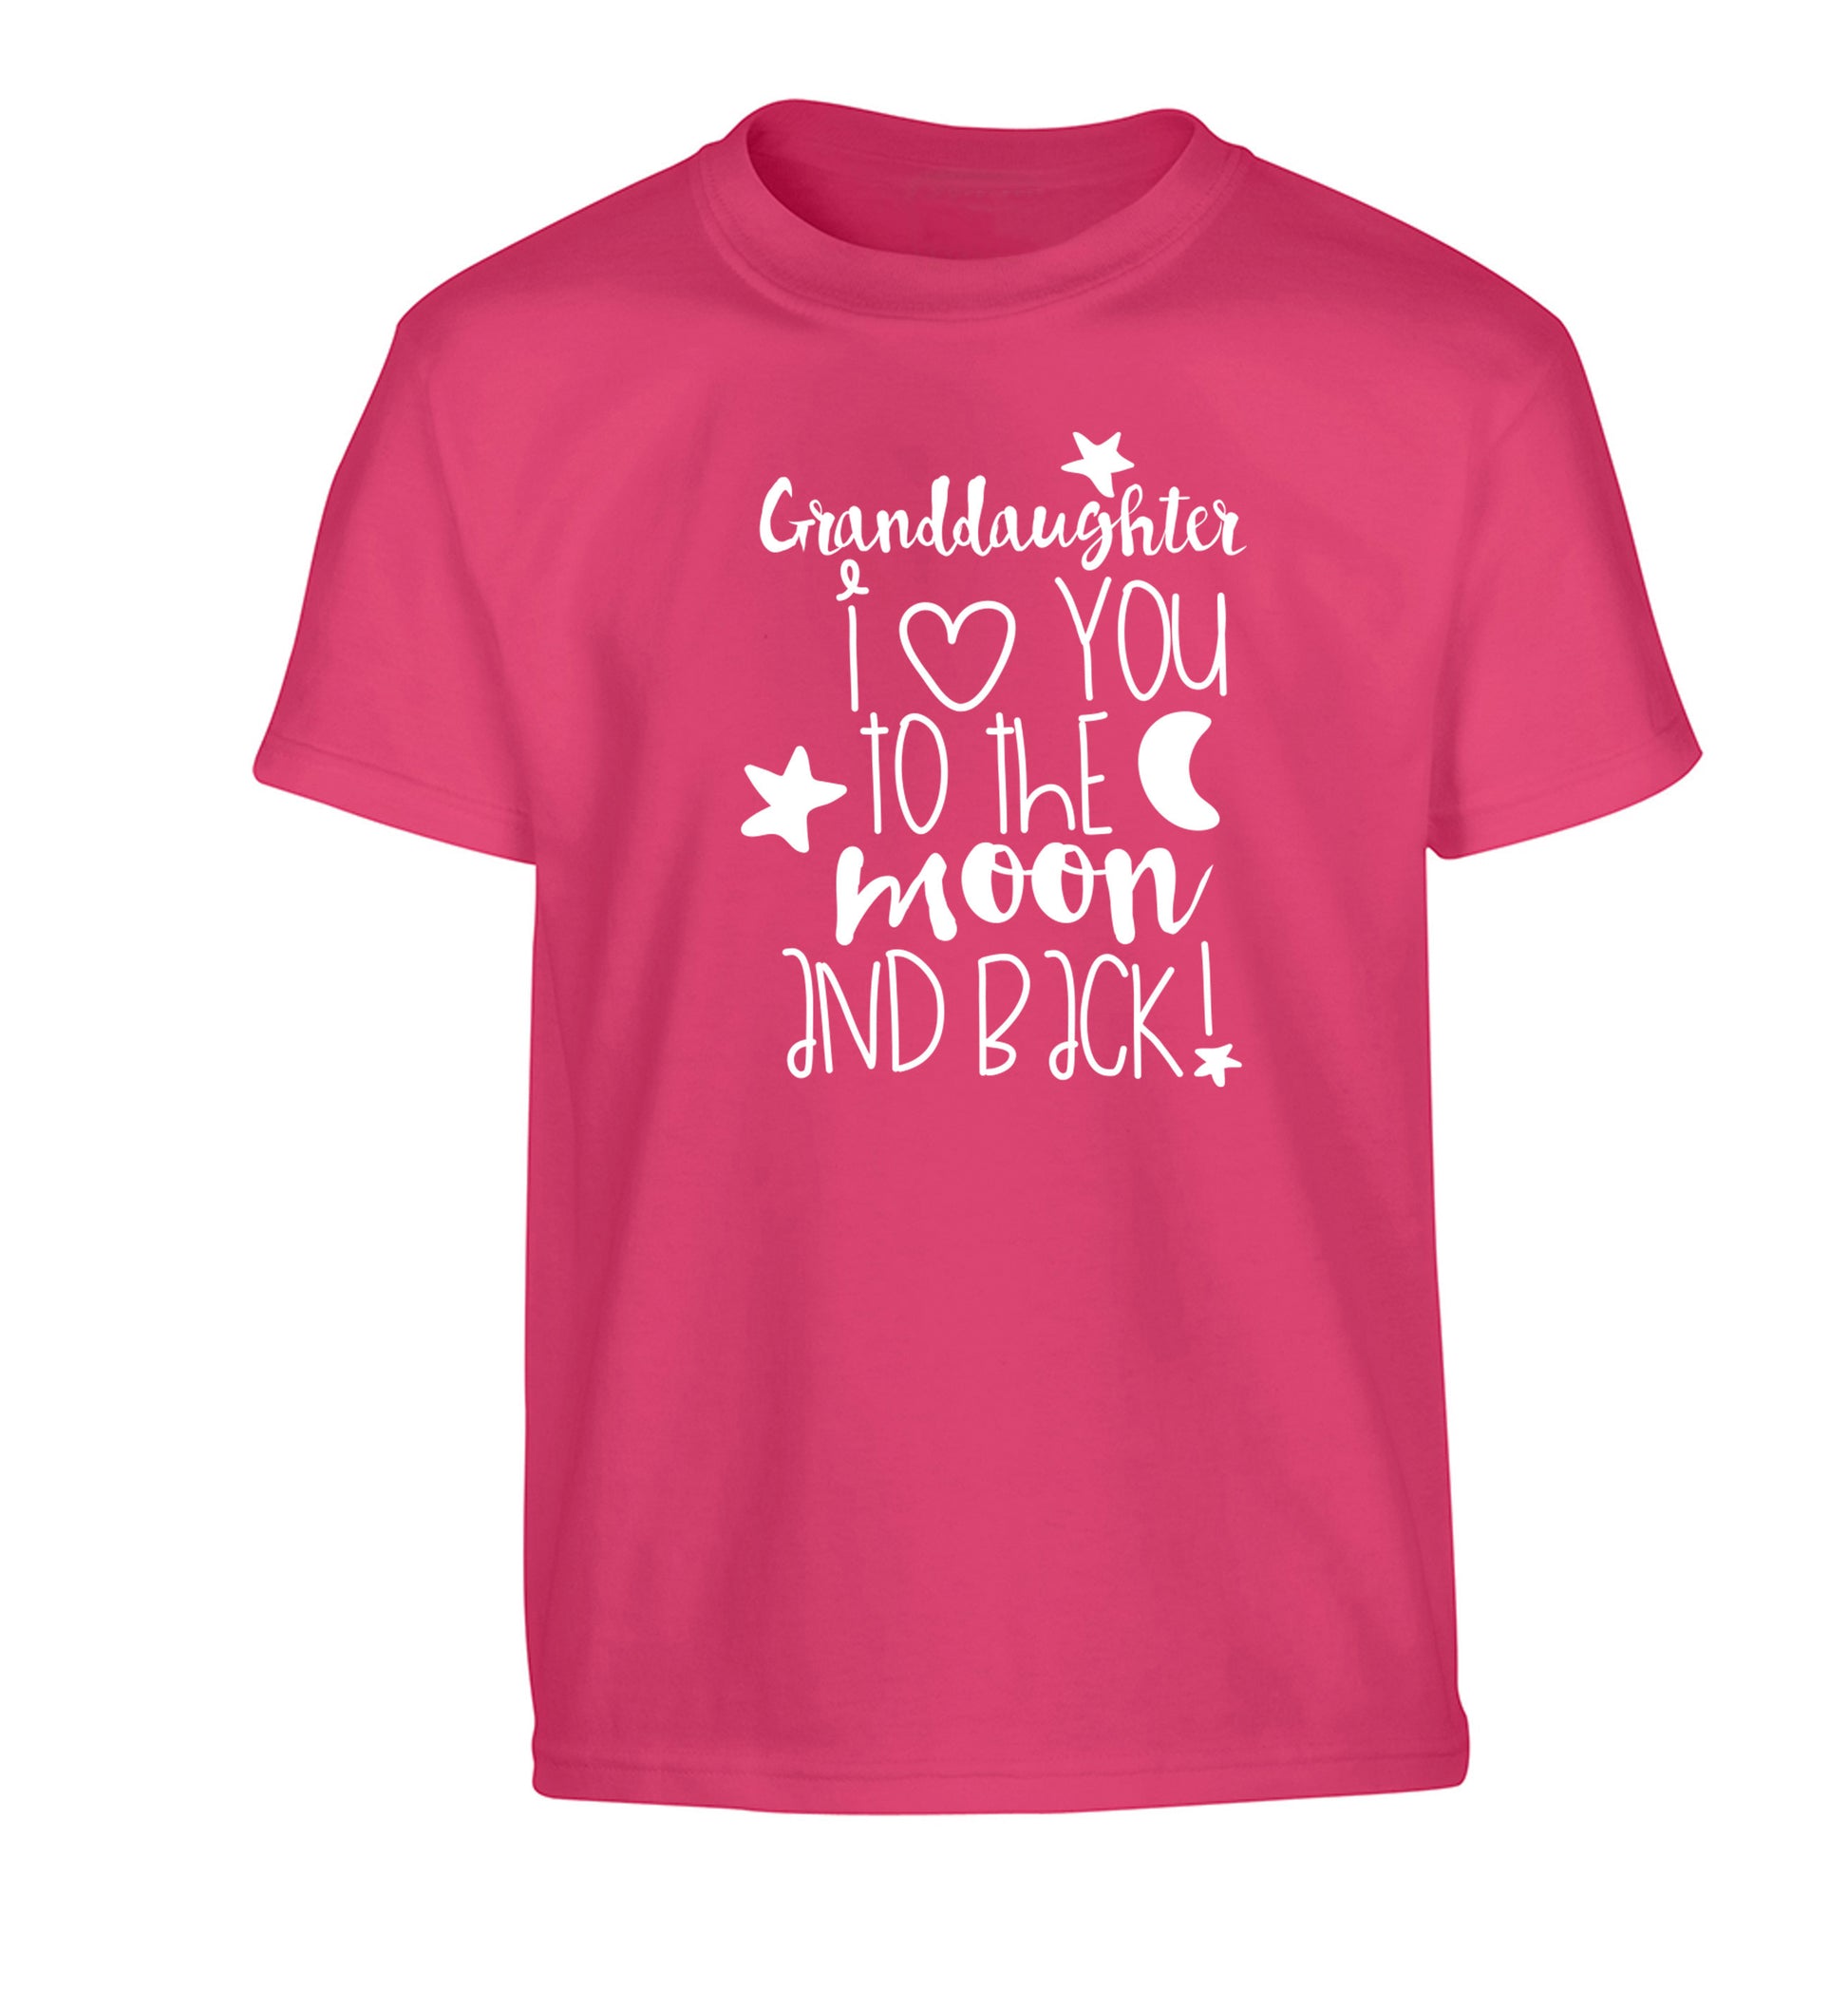 Granddaughter I love you to the moon and back Children's pink Tshirt 12-14 Years